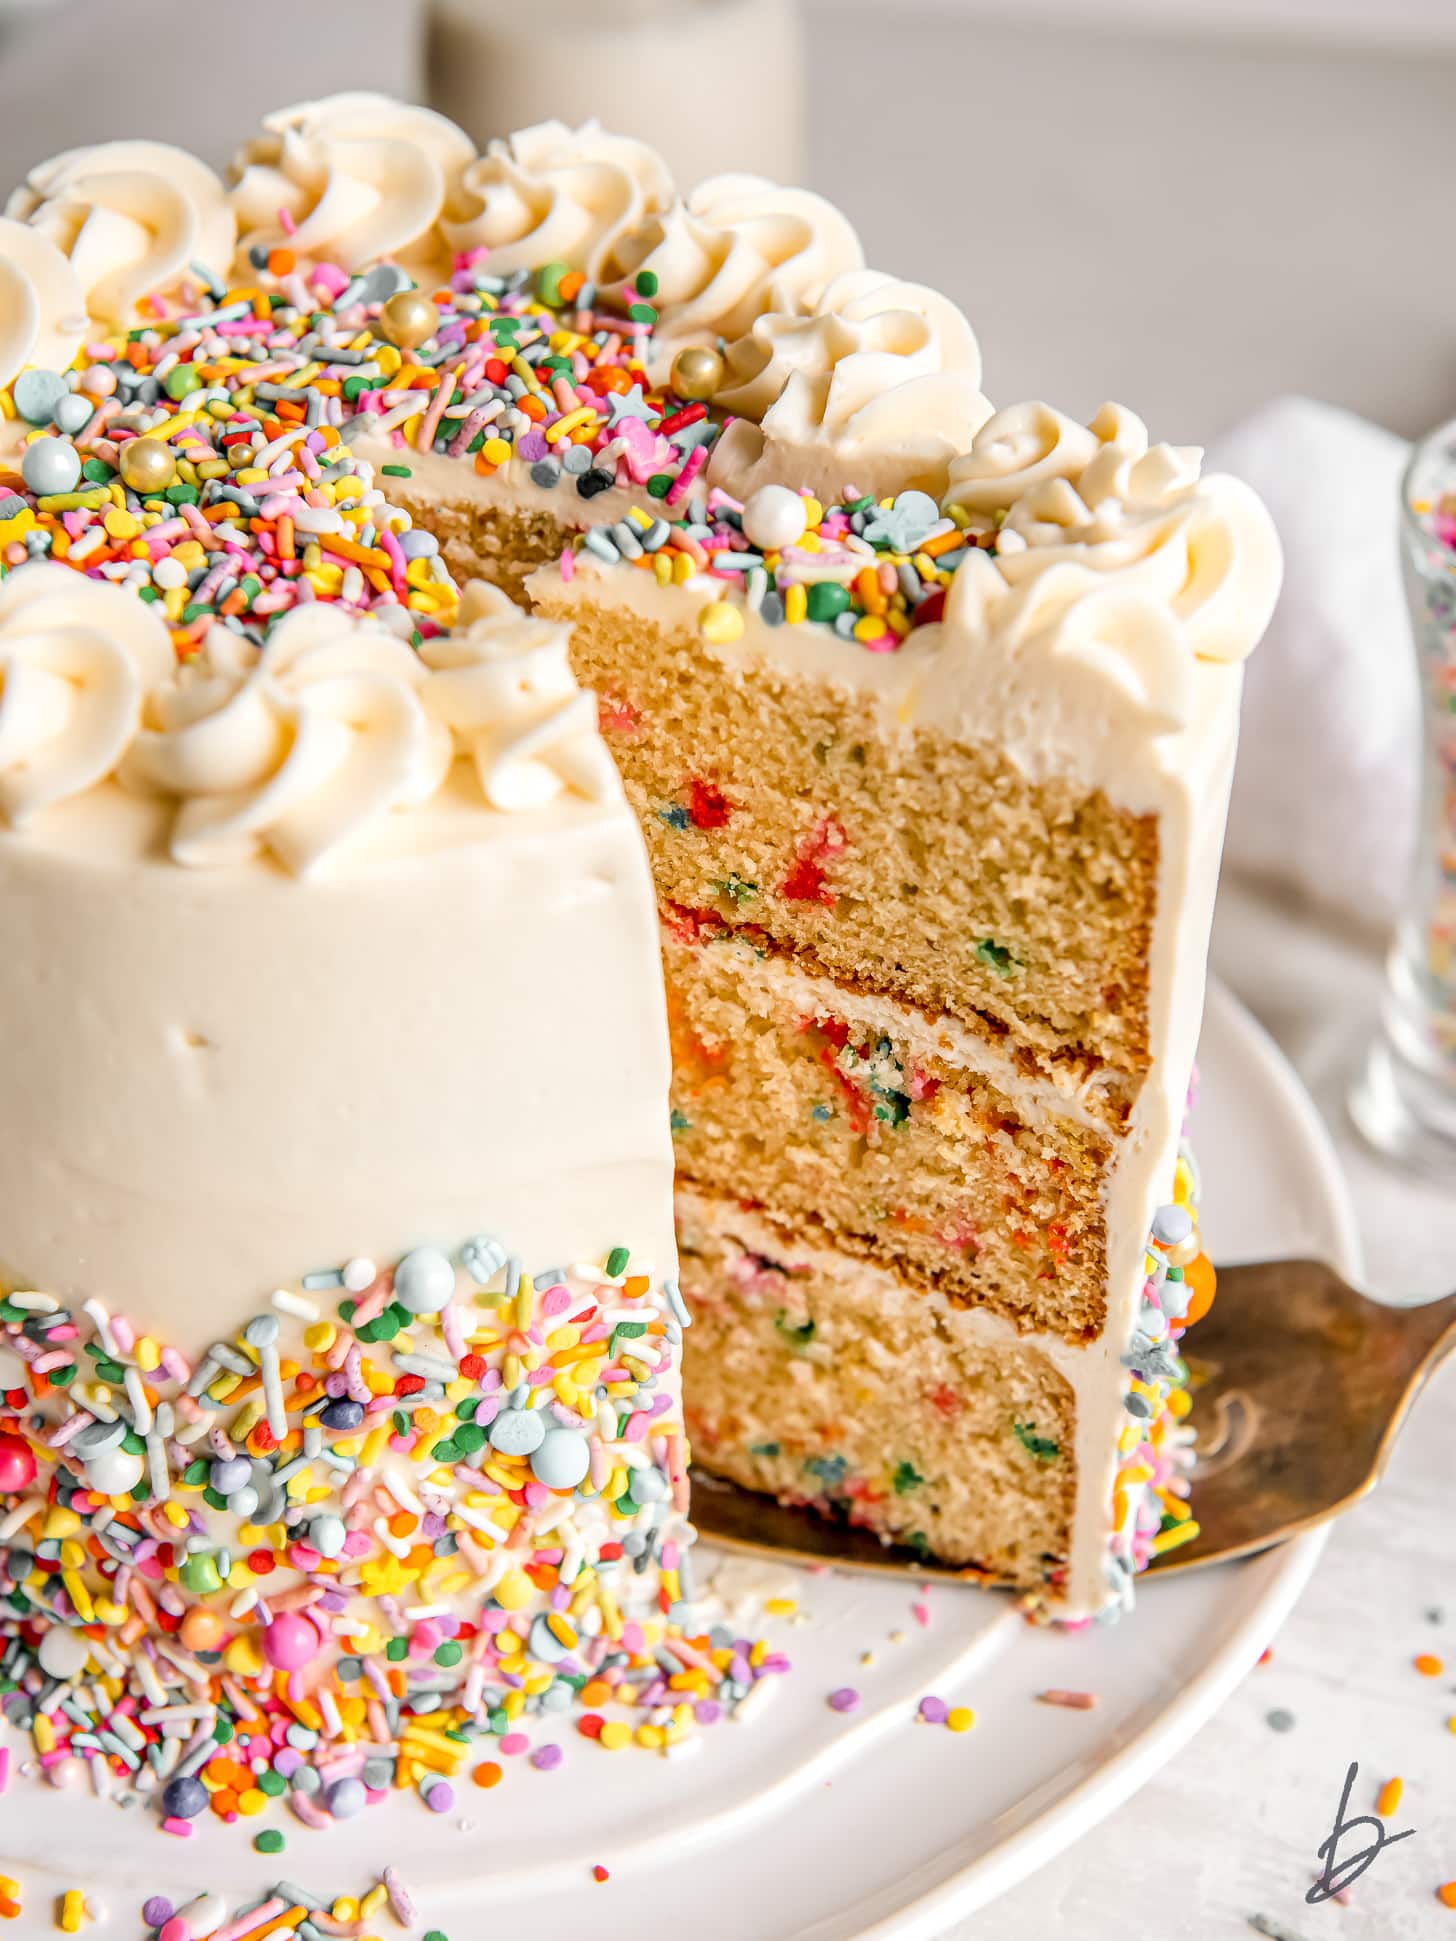 cake server pulling slice of cake out of three layer funfetti cake with frosting and sprinkles.